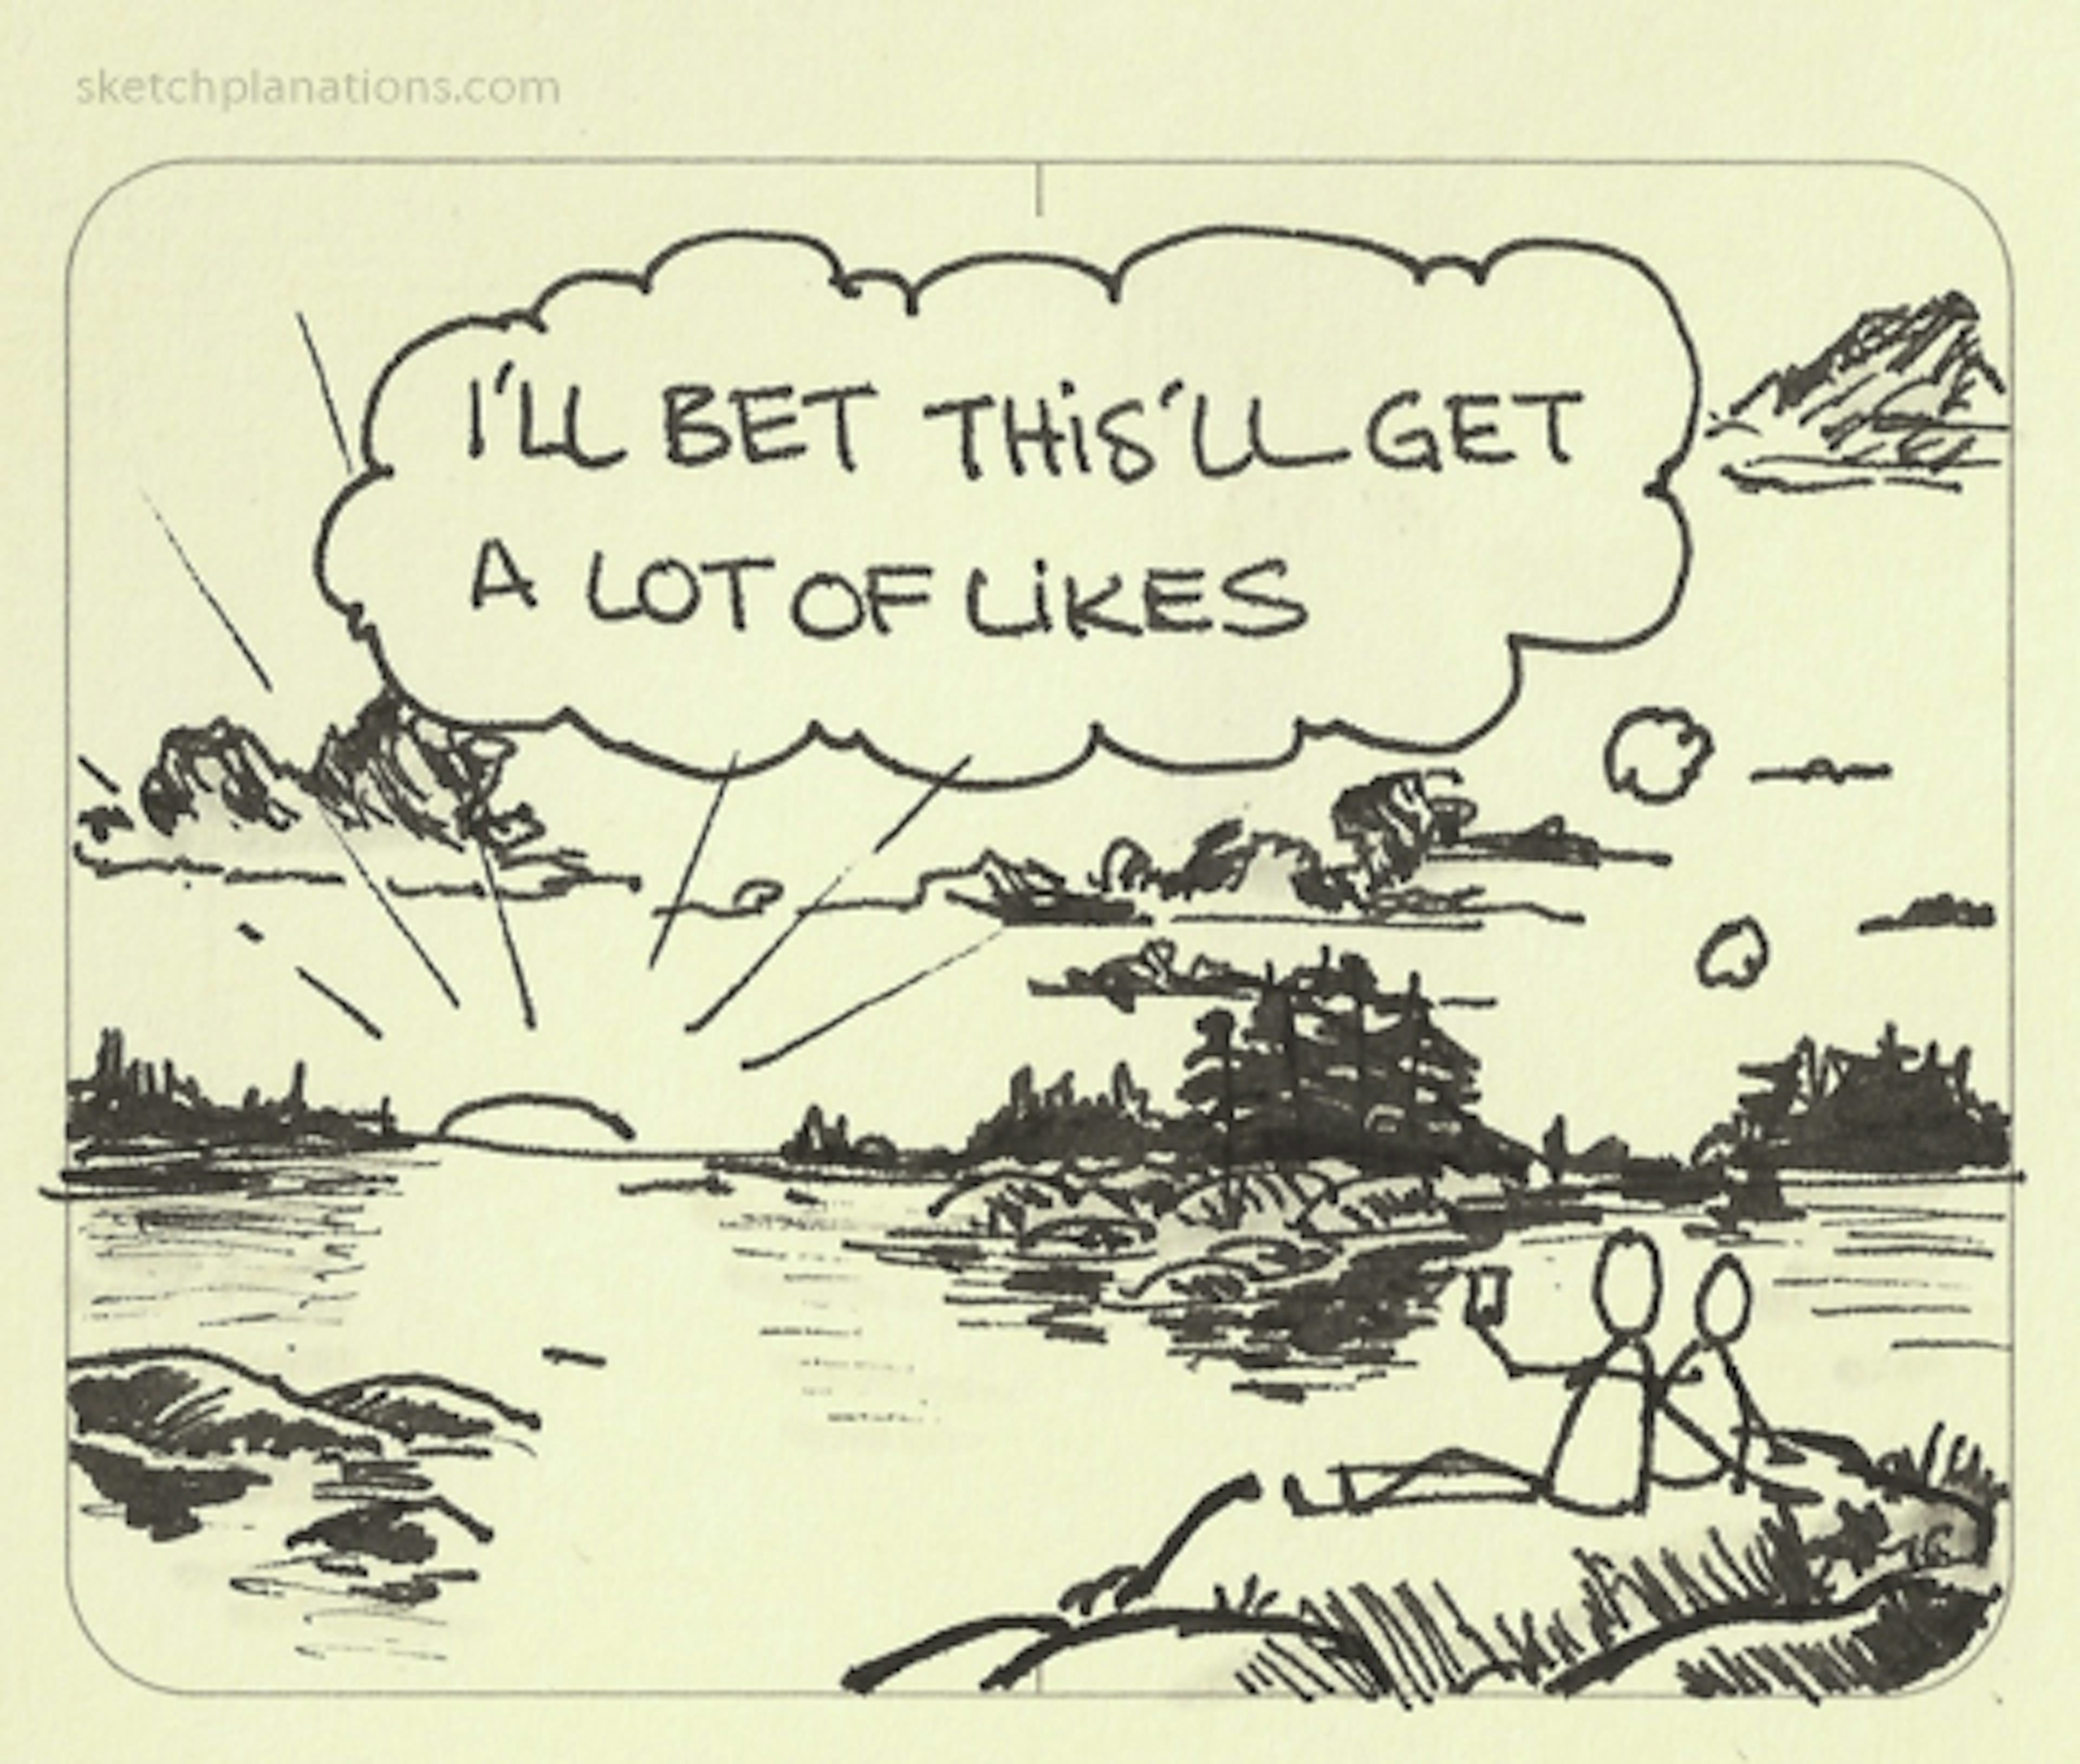 I bet this’ll get a lot of likes - Sketchplanations